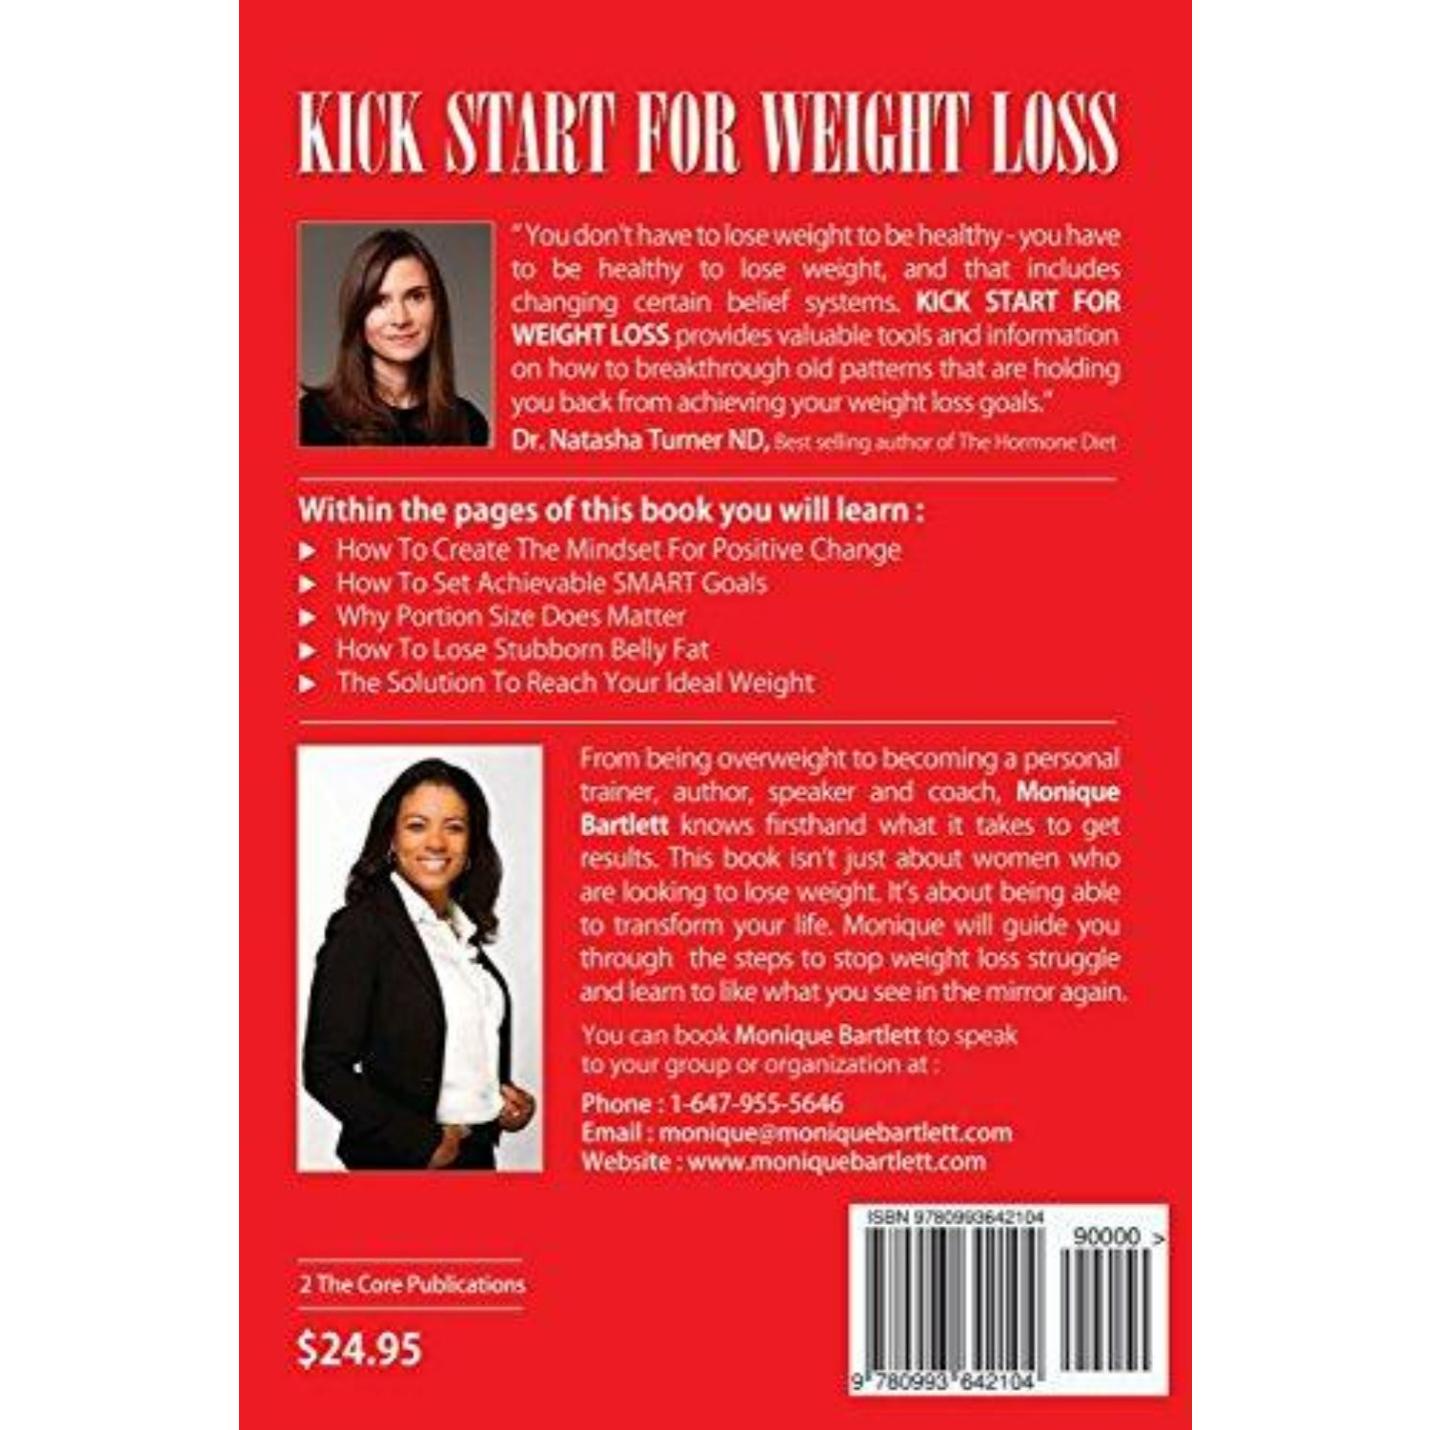 Kick Start For Weight Loss: 3 Massive Mistakes Professional Women Make That Keep Them Overweight, Exhausted and Stuck On The Diet Treadmill - happygetfit.com